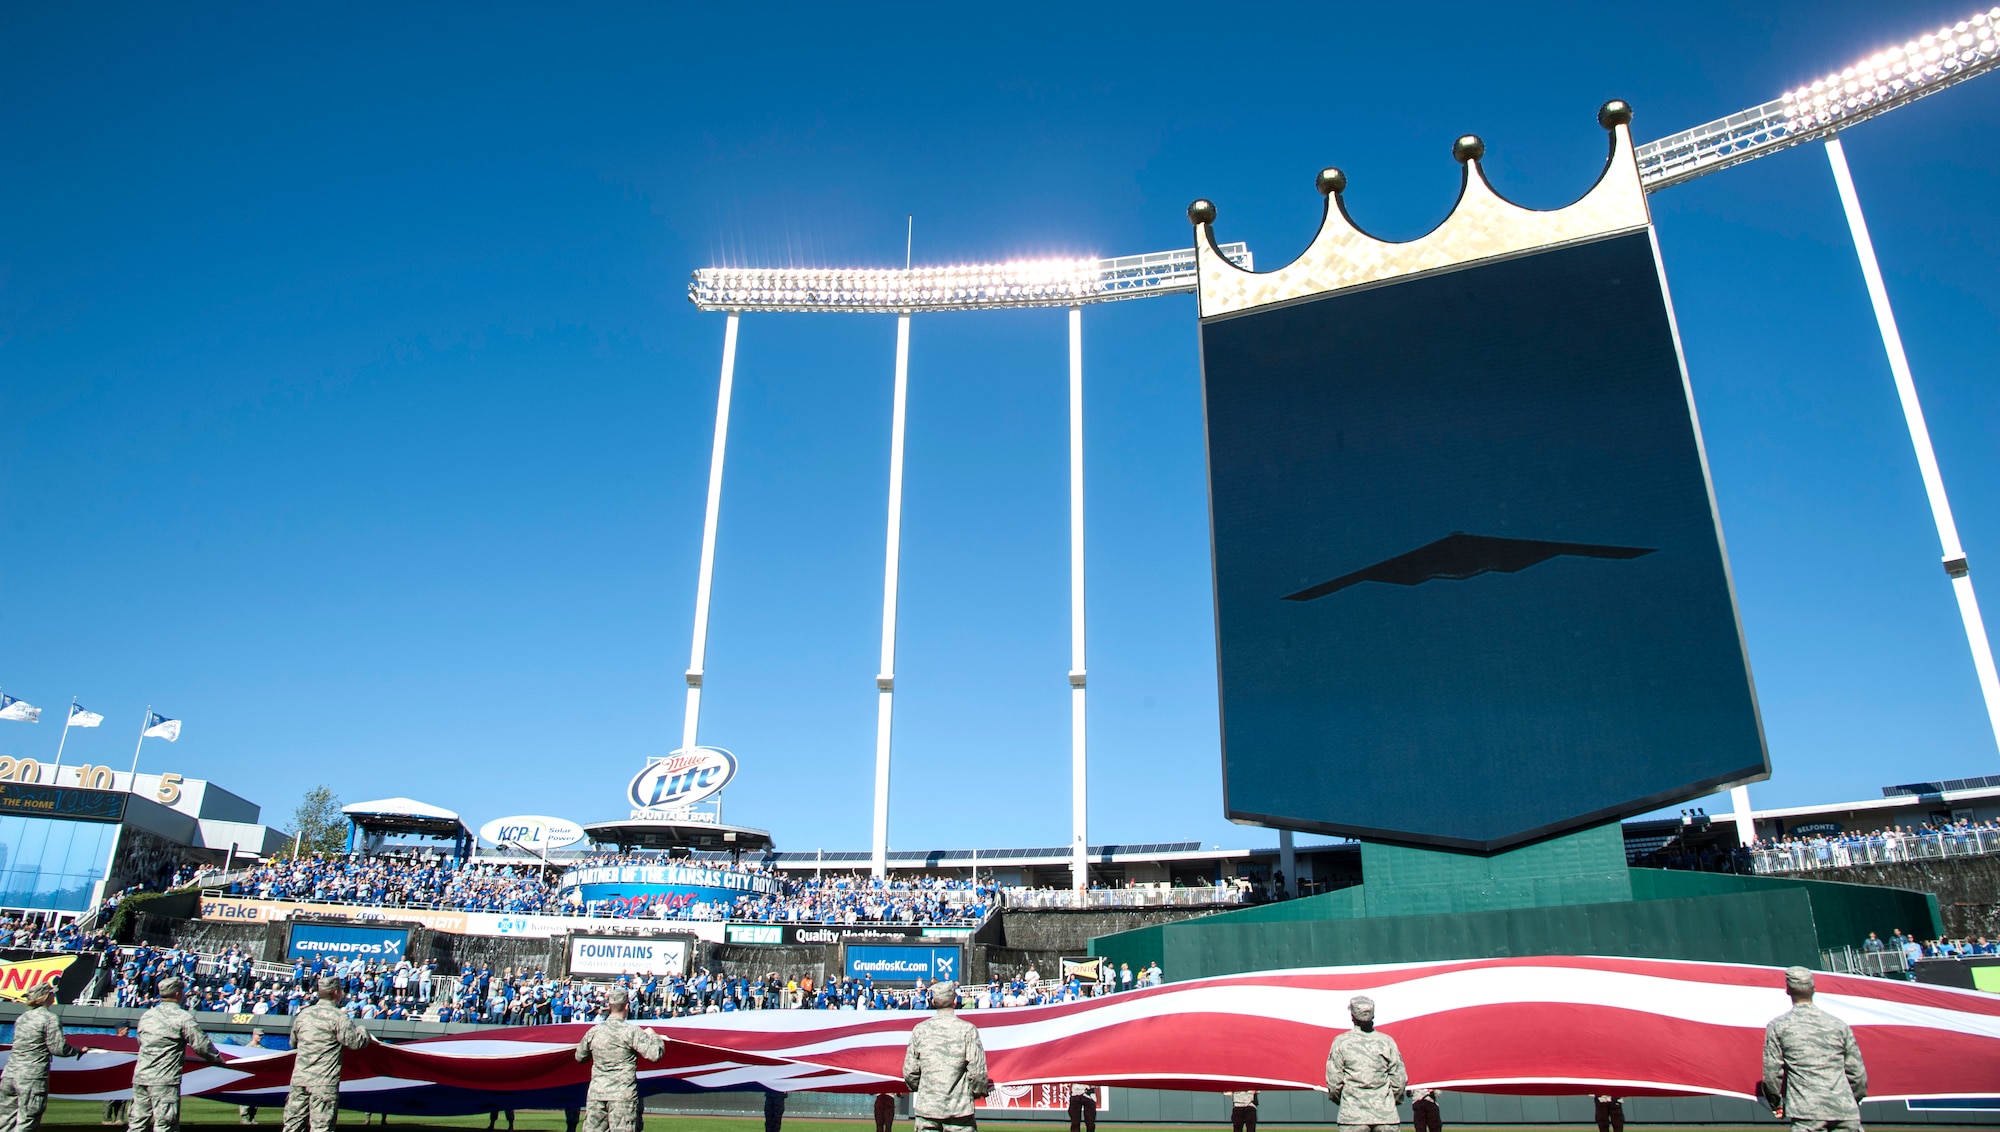 Airmen from the 509th Bomb Wing and 131st Bomb Wing at Whiteman Air Force Base, Mo., hold the American flag during the Royals vs. Orioles baseball game at Kauffman Stadium in Kansas City, Mo., Oct. 15, 2014. A B-2 Spirit stealth bomber made an appearance during the pre-game activities, representing the U.S. Air Force to a packed stadium as well as a TV viewership of millions during Game 4 of the American League Championship Series. (U.S. Air Force photo by Staff Sgt. Brigitte N. Brantley/Released)